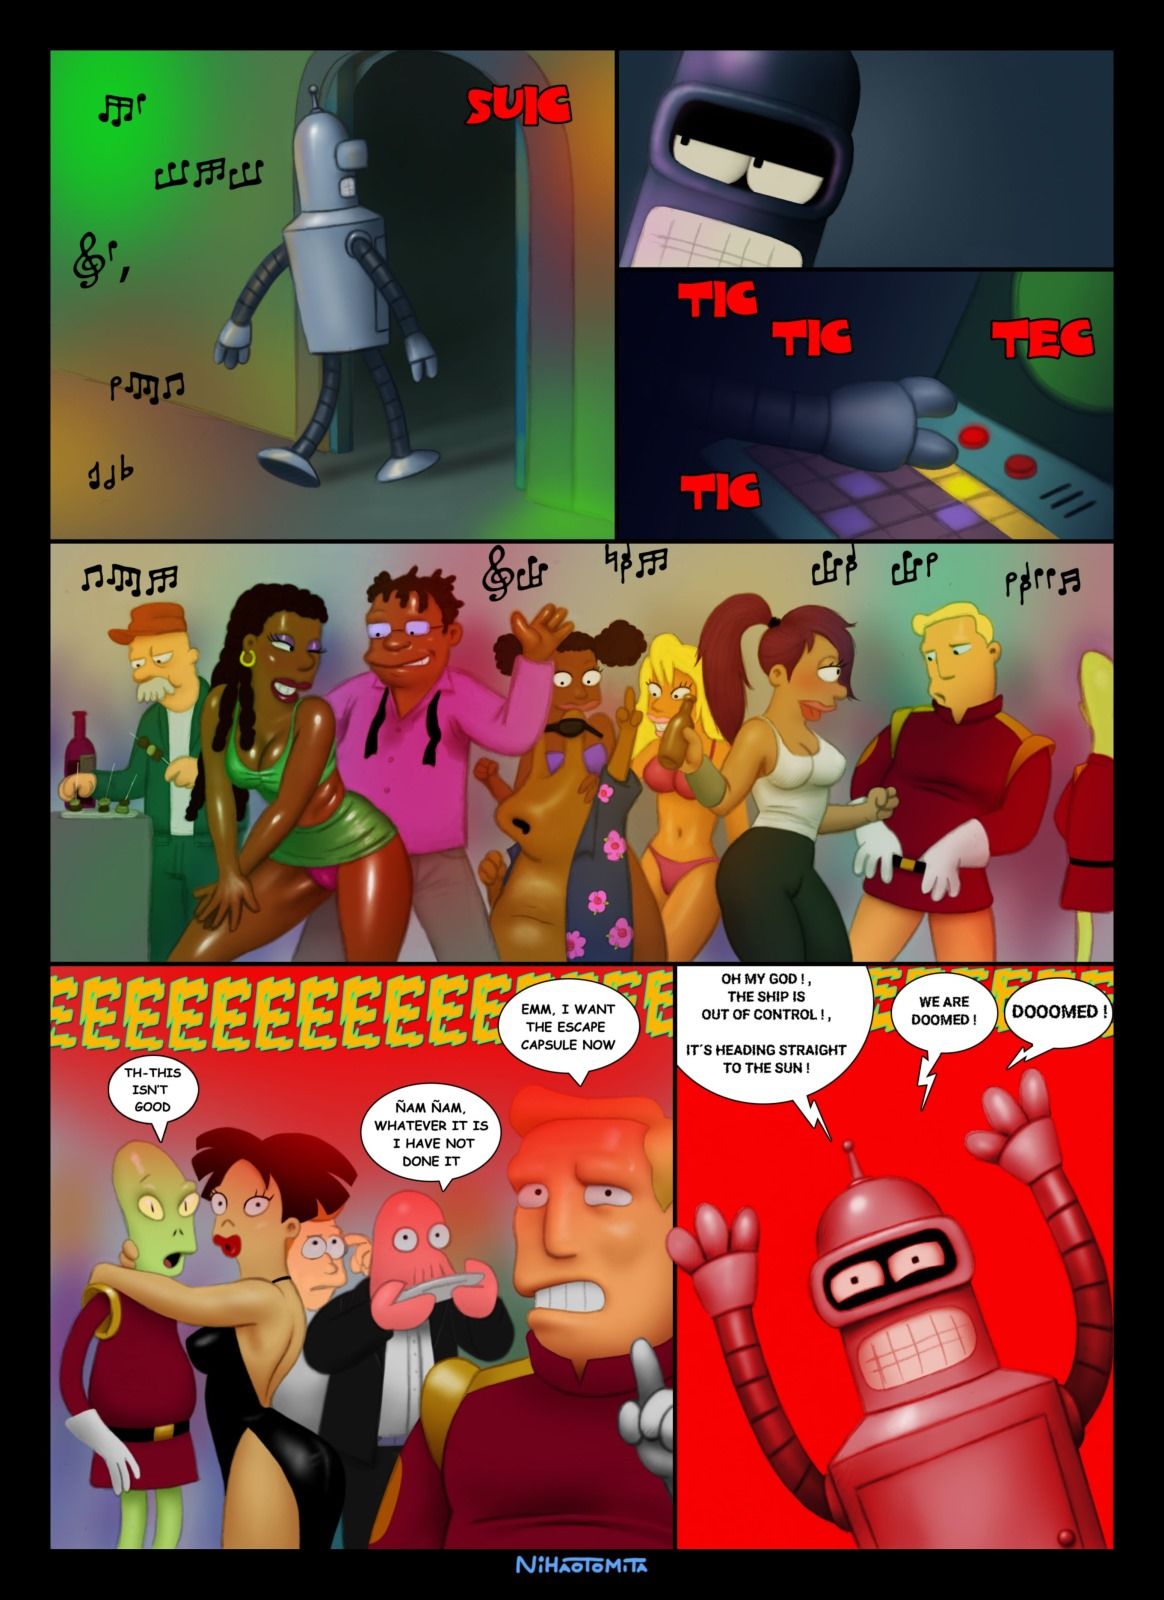 [nihaotomita] Futurama - An indecent proposition page 2